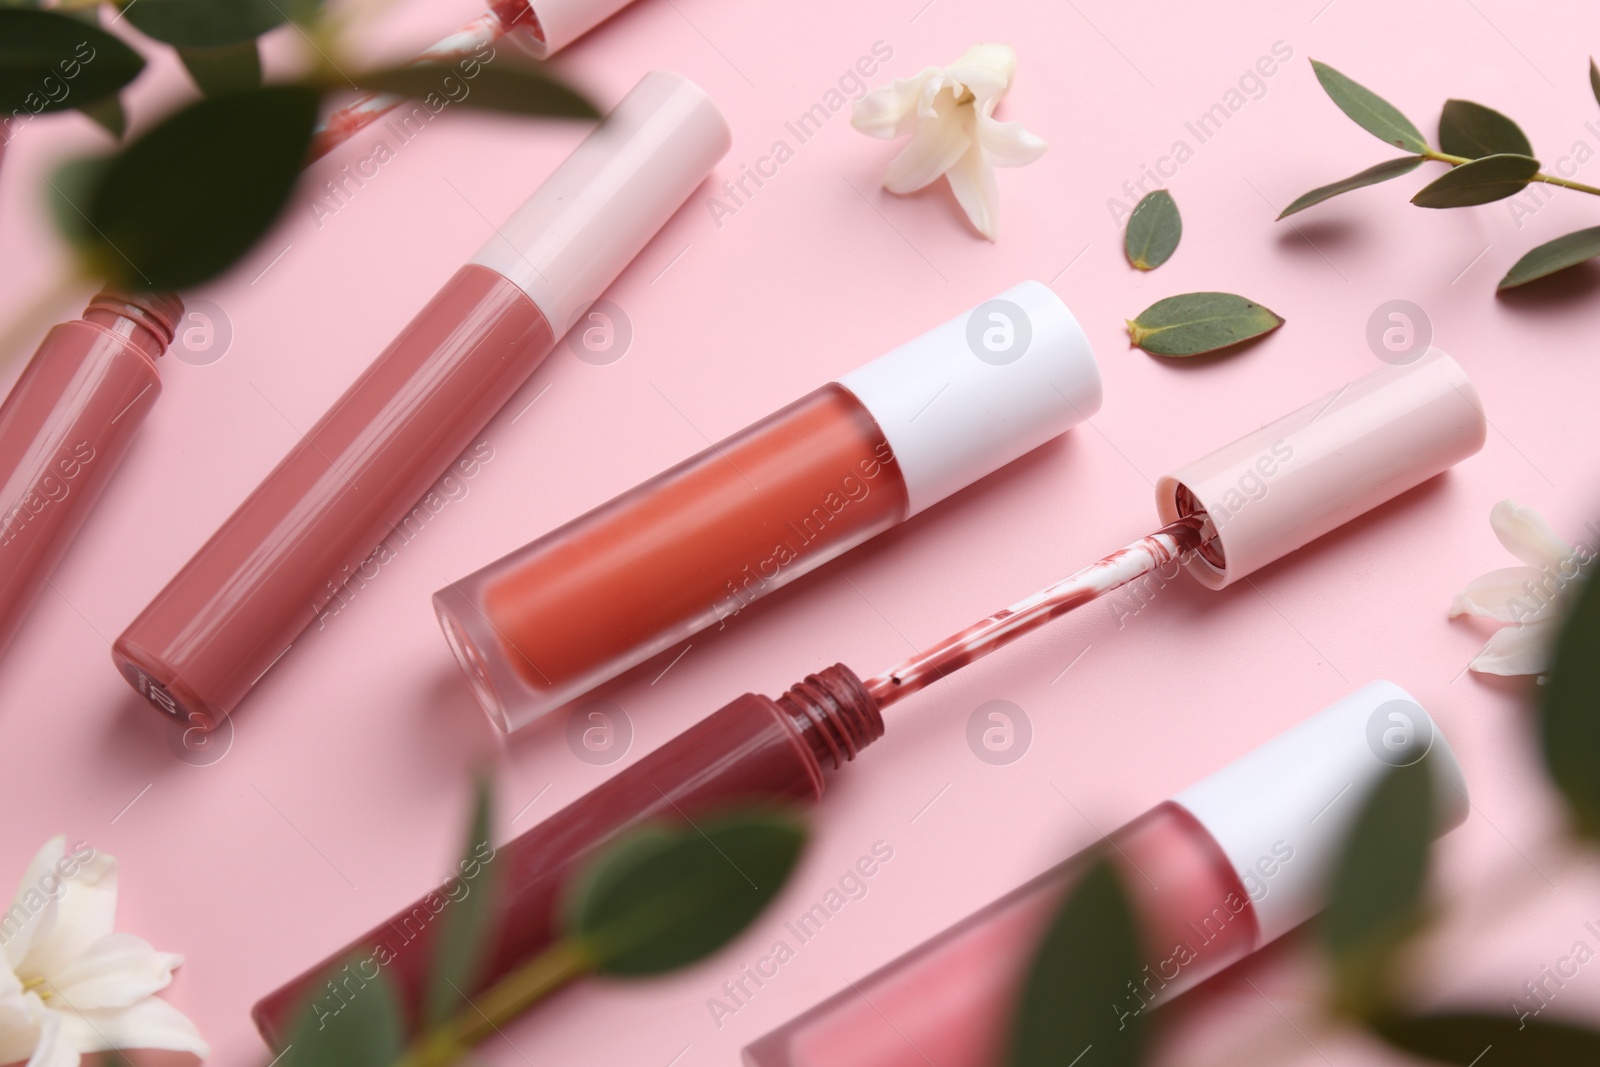 Photo of Different lip glosses, applicator, flowers and green leaves on pink background